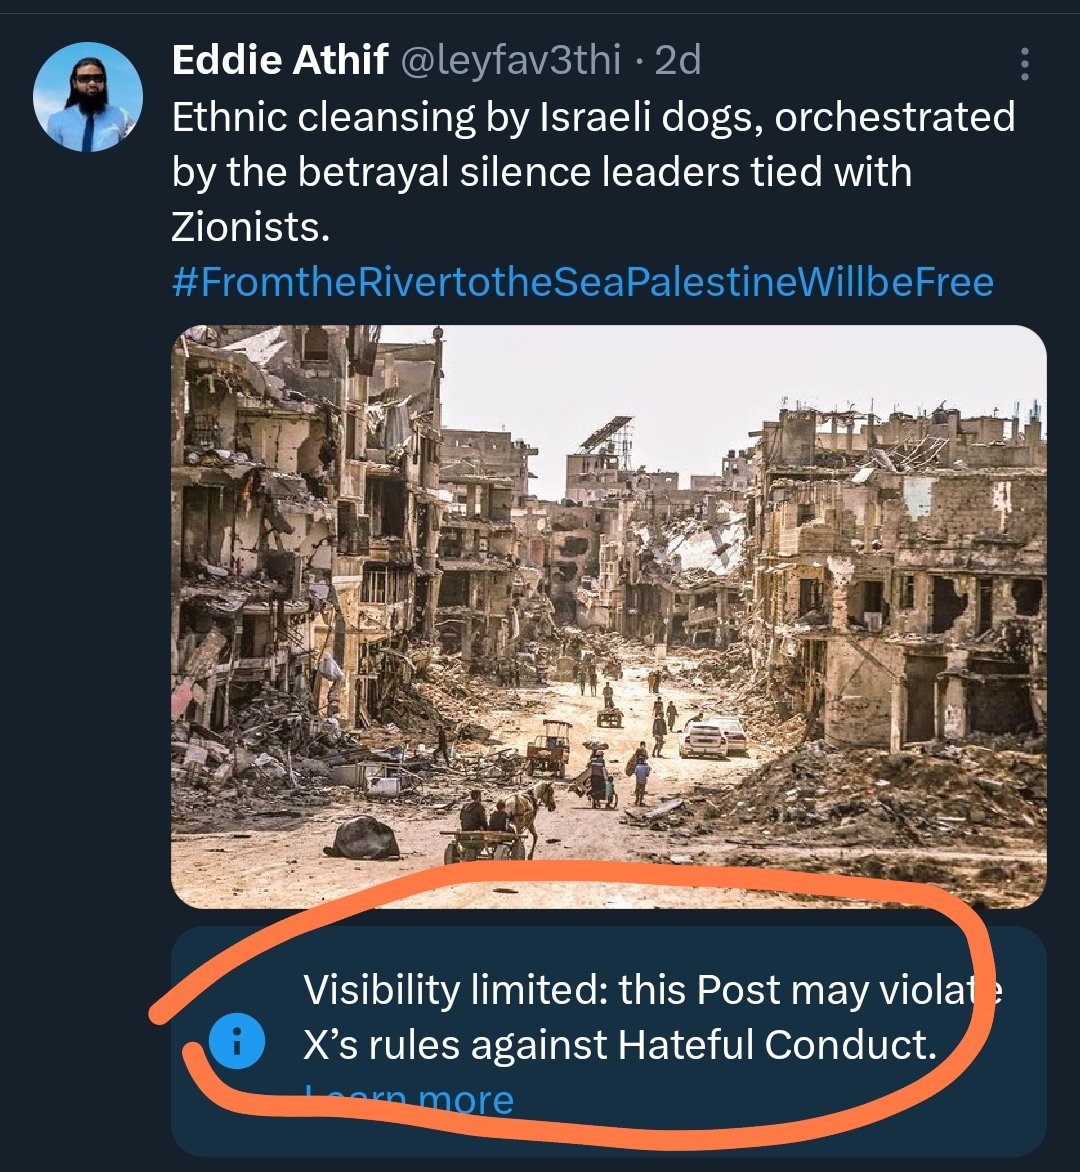 This is somehow they support the Israeli genocide. @elonmusk if you are alive, one day you will witness that Palestine is free from the river to the sea.